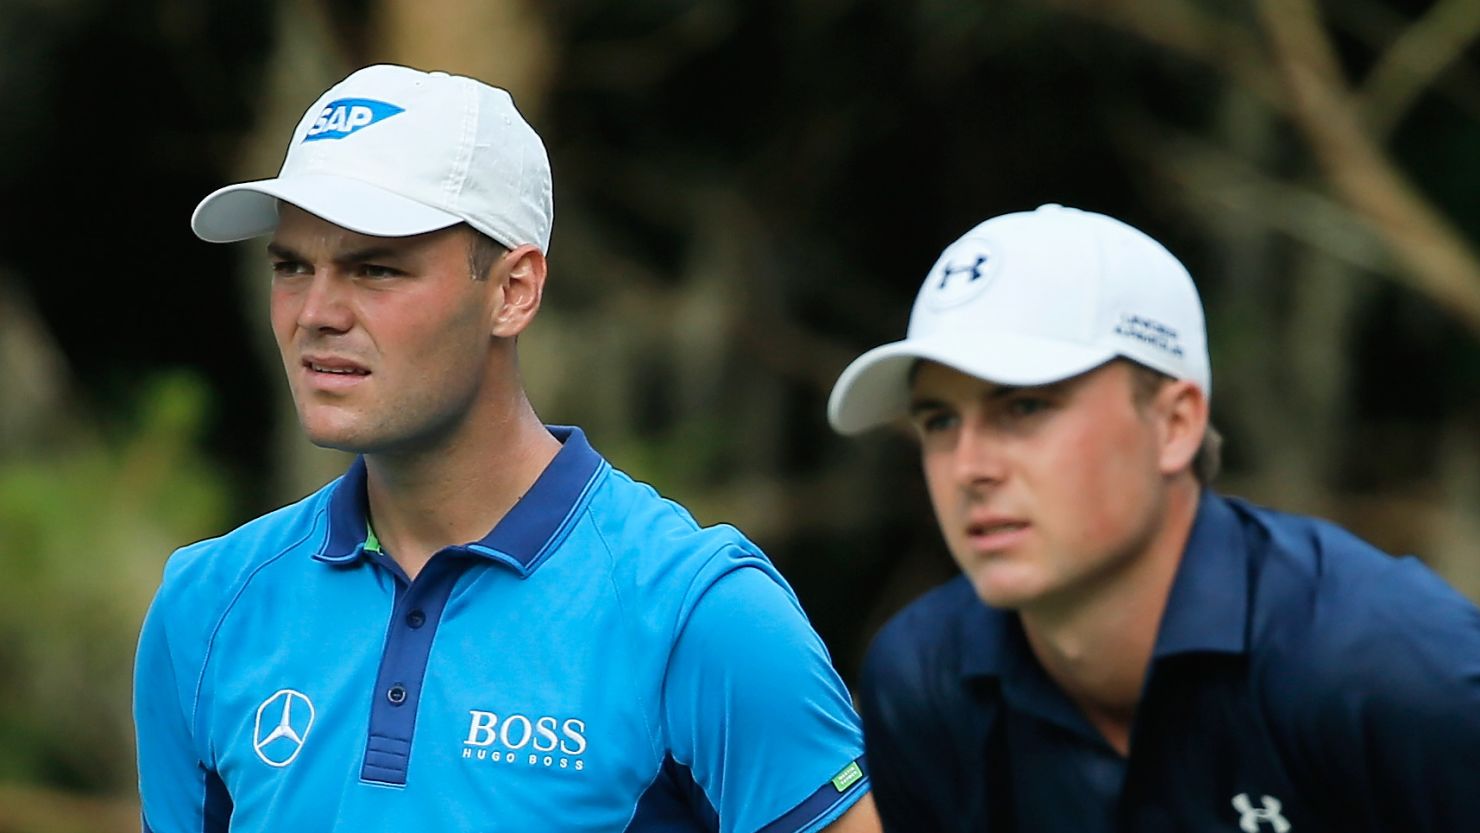 Martin Kaymer and Jordan Spieth are locked together at the top of the leaderboard going into the final round of the Players Championship.